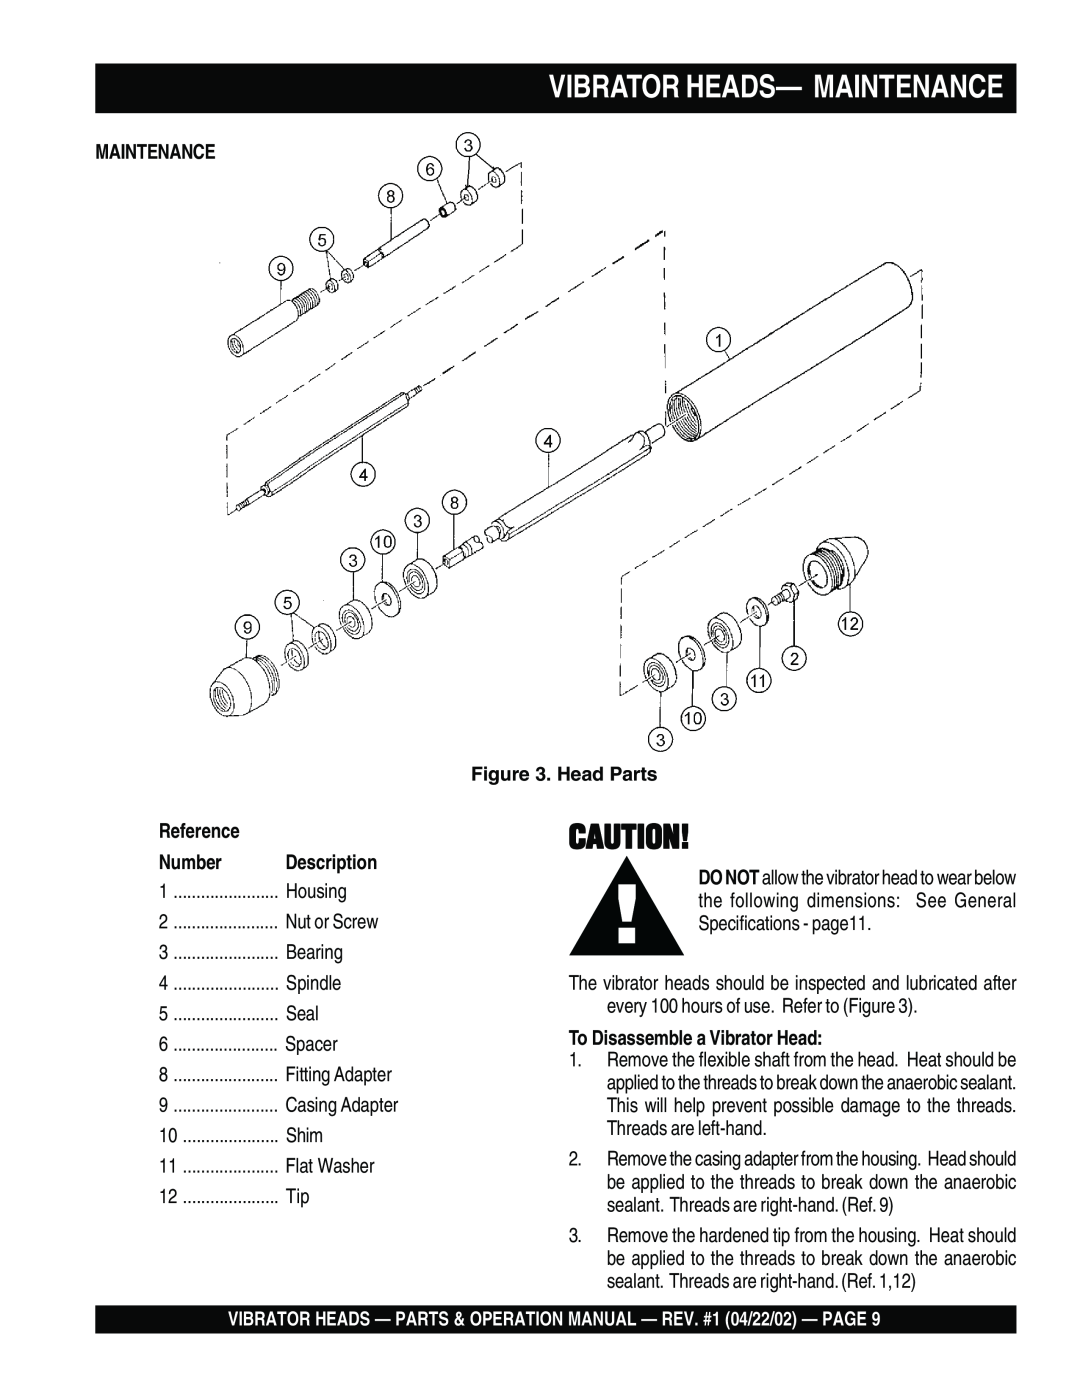 Stow 1000, 2600 Vibrator Heads- Maintenance, Reference, Number, Description, Head Parts, To Disassemble a Vibrator Head 